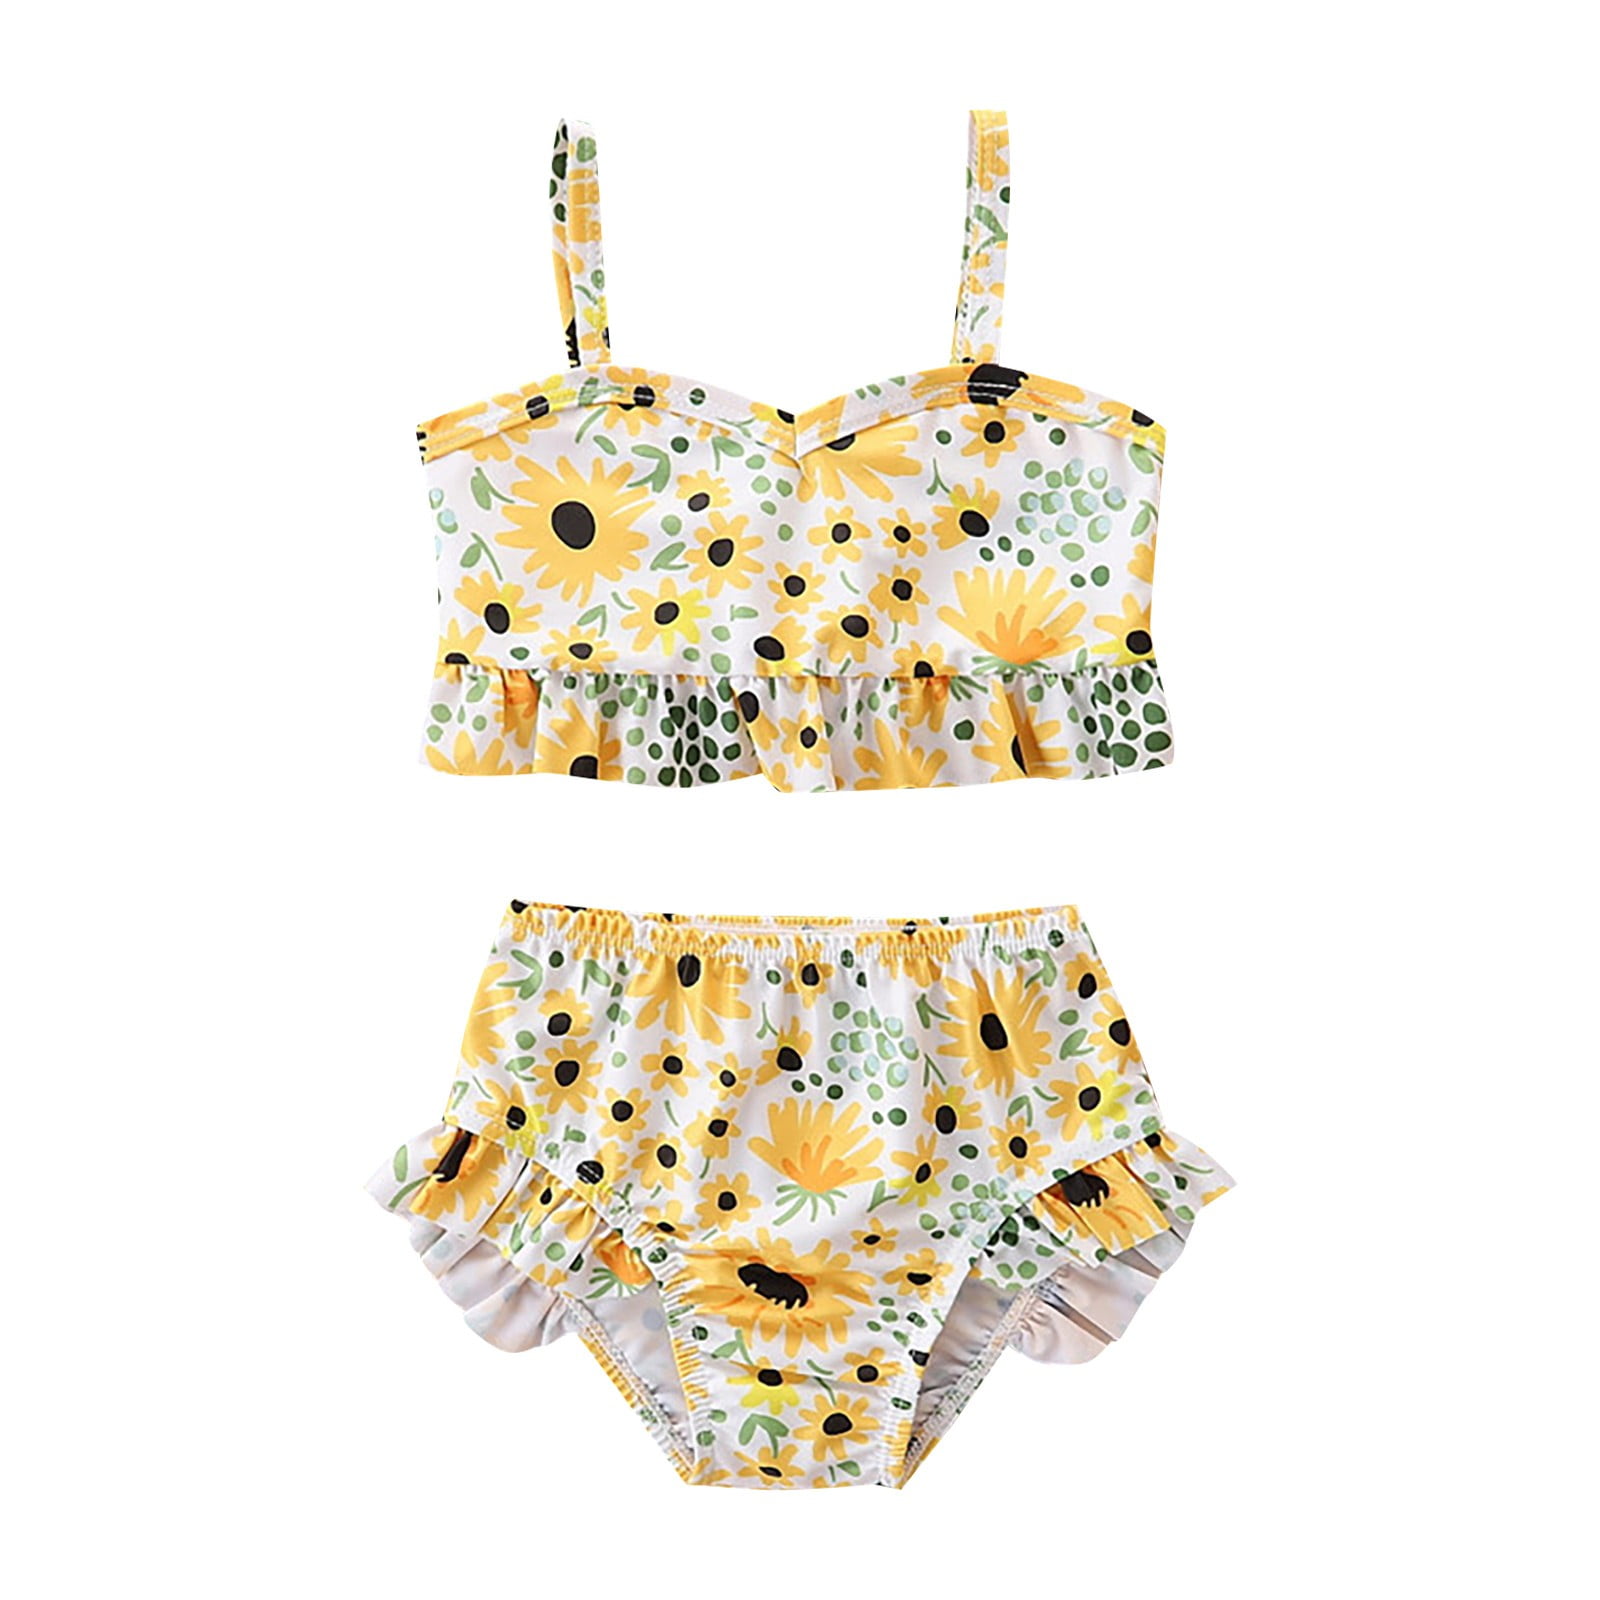 Toddler Swimsuit Girl Size 6T Two Piece Sunflower Print For 2 To 6 ...